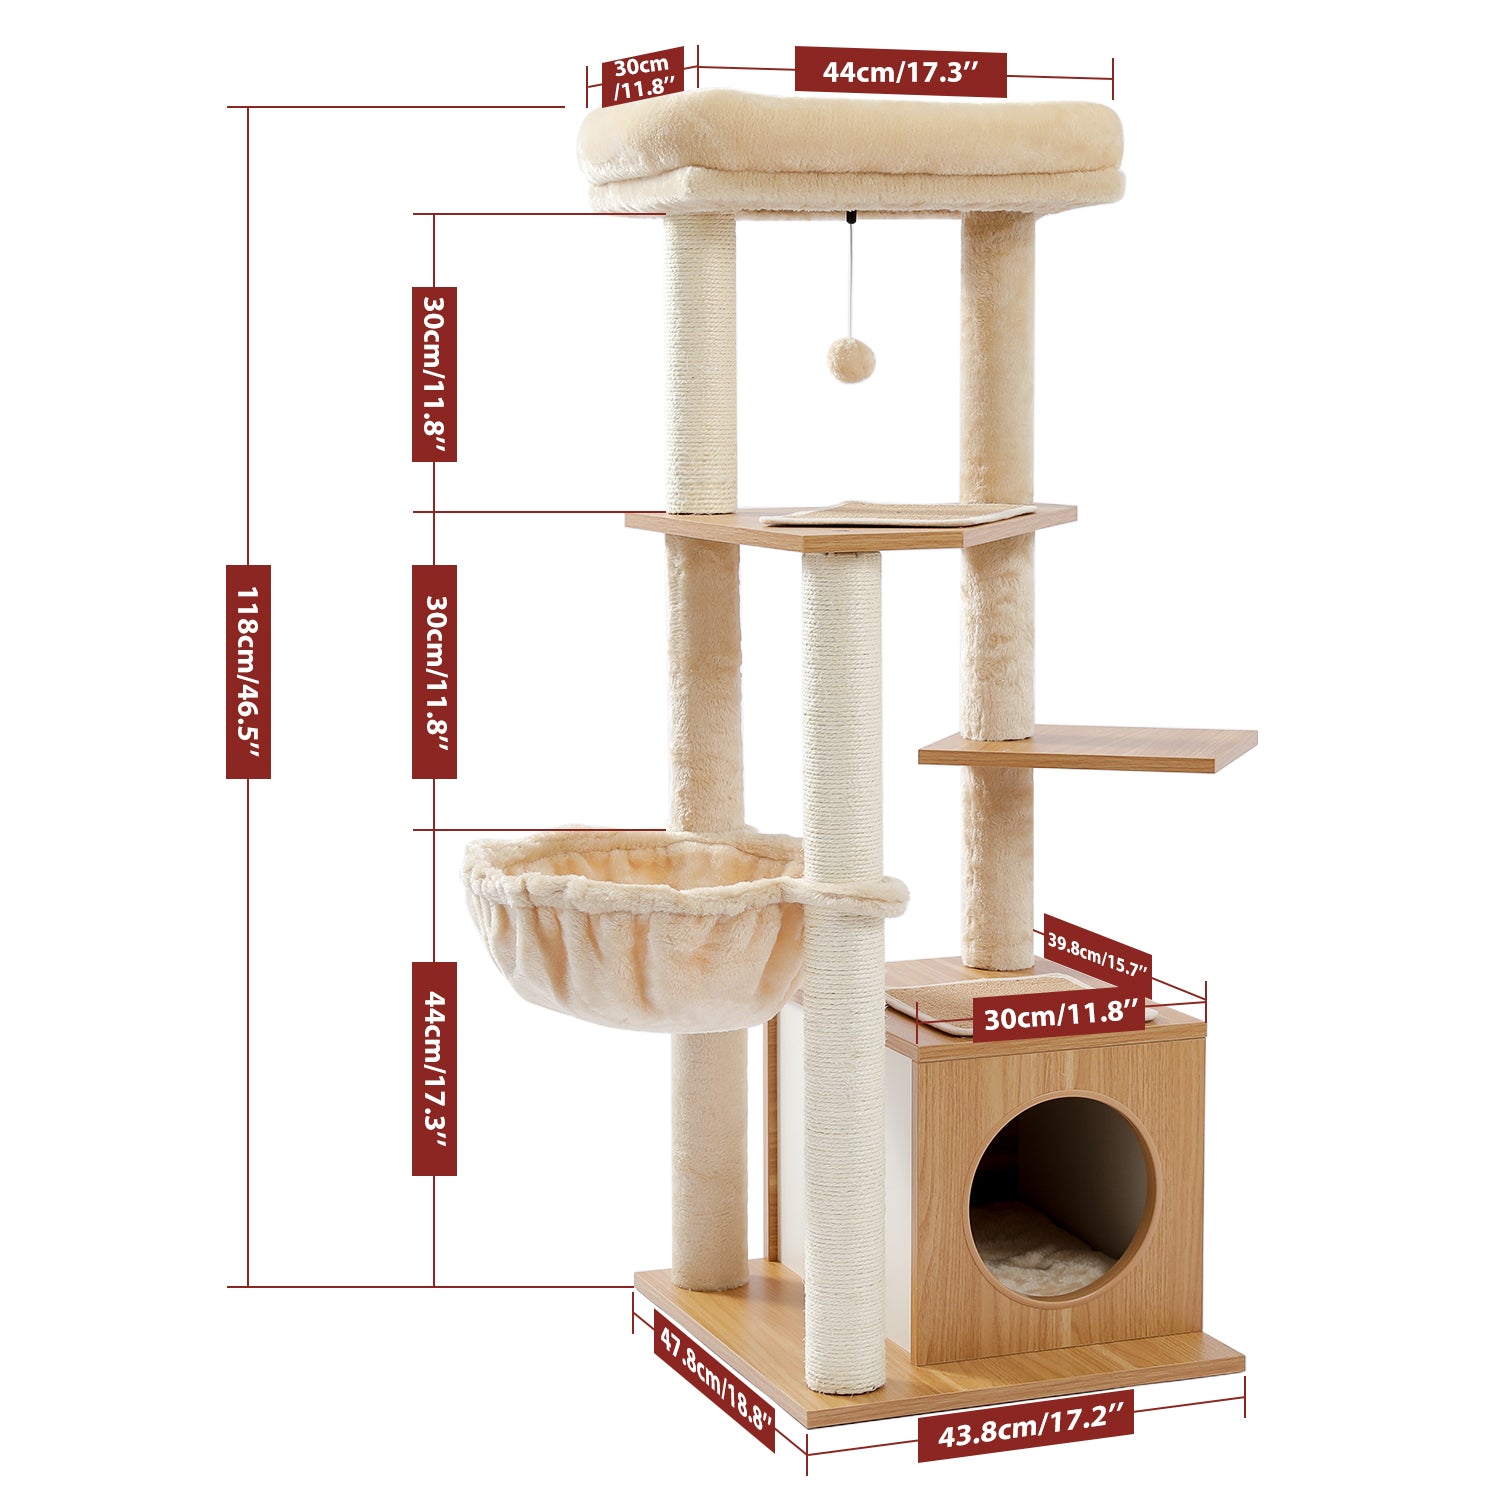 Multilevel Wood Cat Tree Cat Tower Cat Play House with Large Condo, Spacious Hammock, Cozy Top Perch and Dangling Balls for Indoor Cats - TOYSHIP